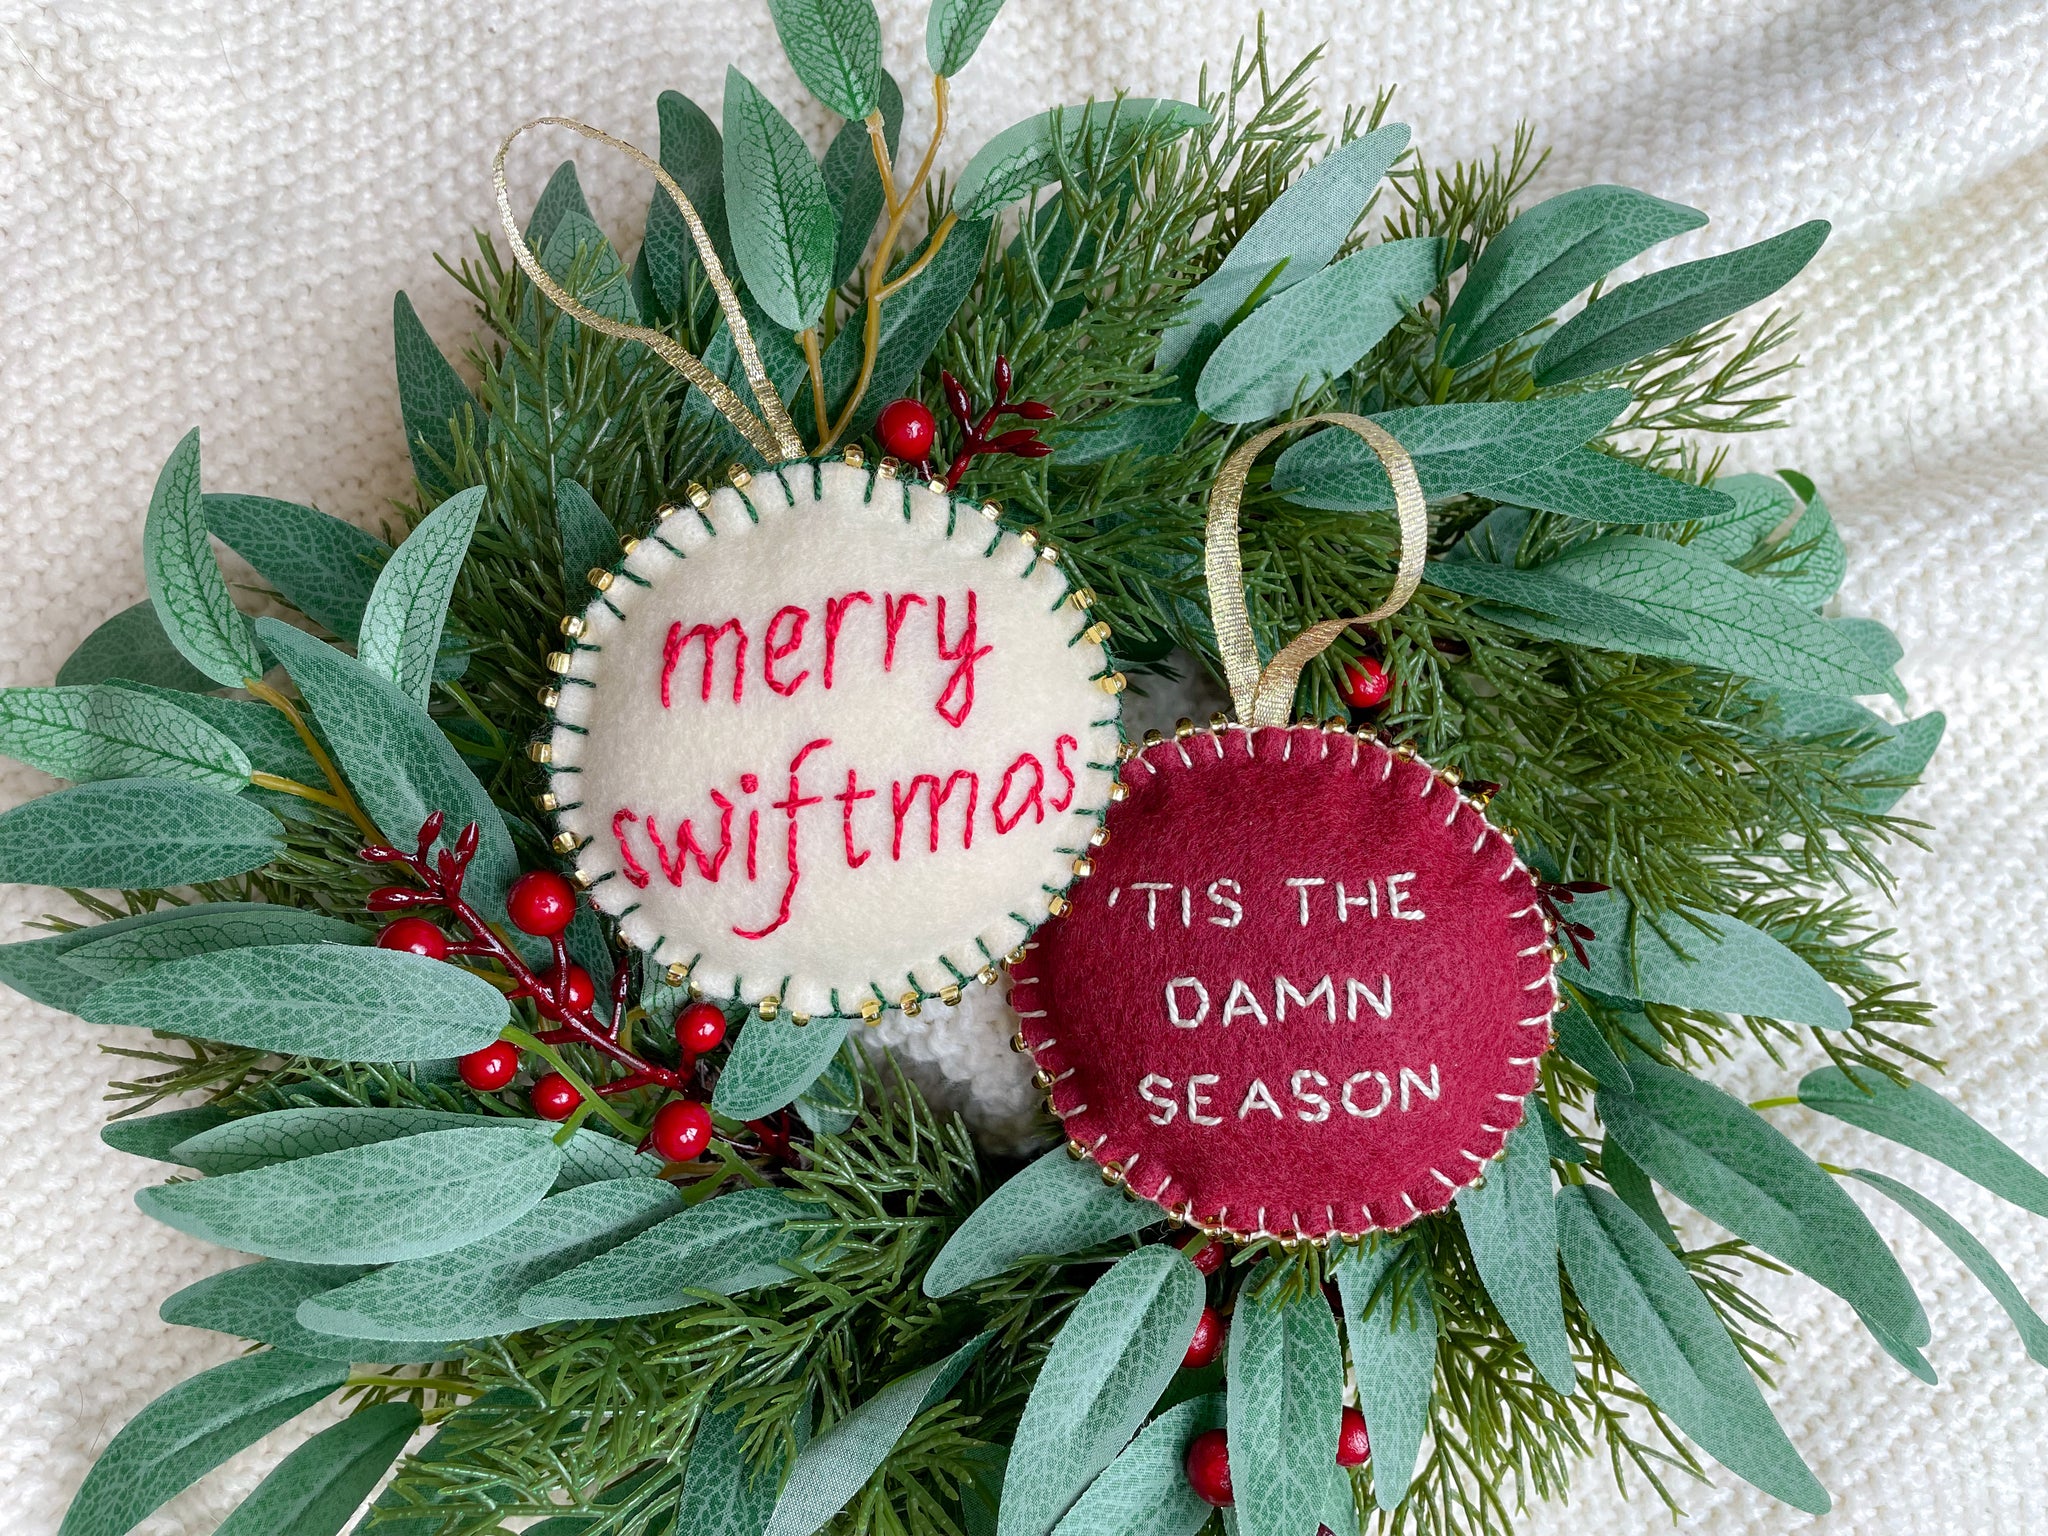 Tis the Damn Season and Merry Swiftmas Hand Embroidered Ornaments